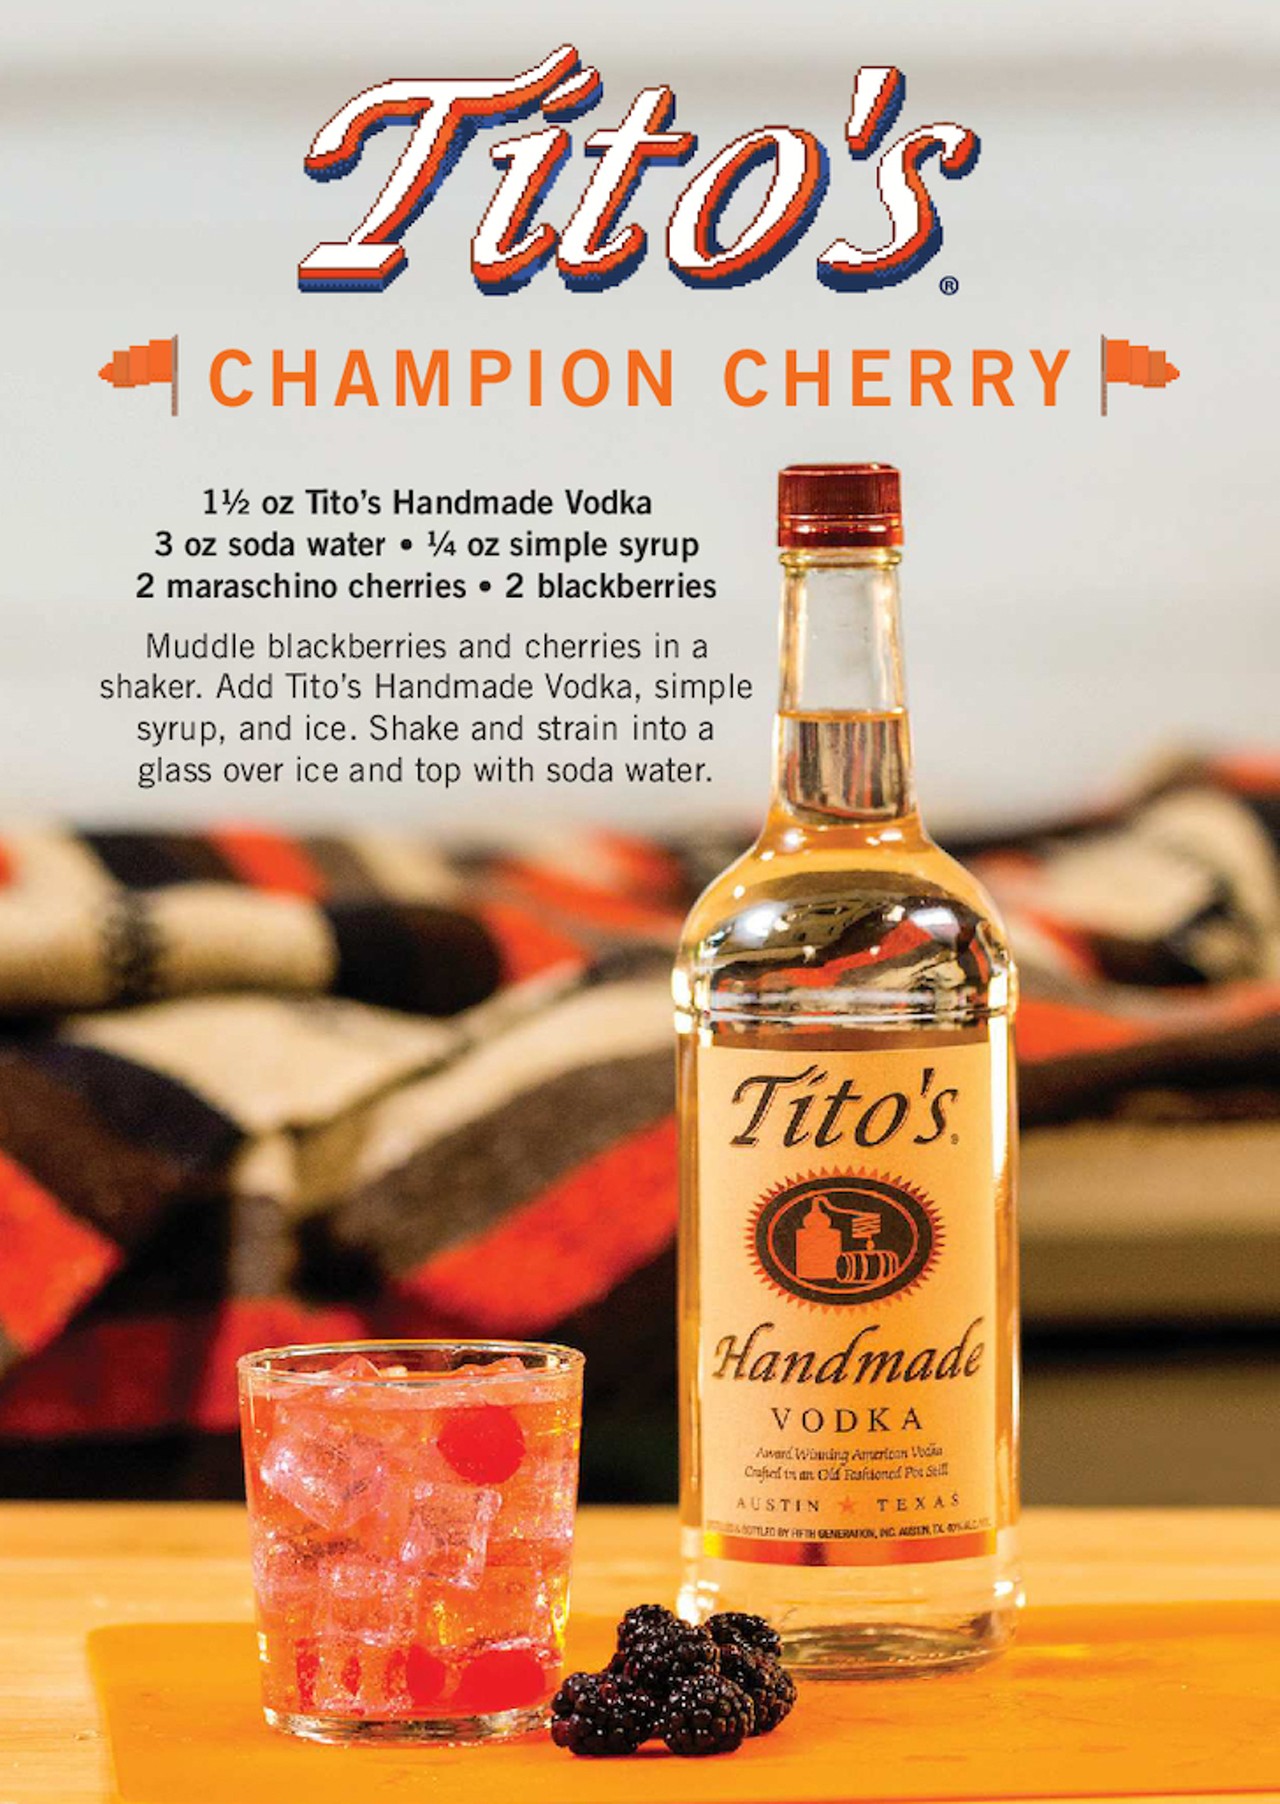 Titos Fall Cocktail Recipes To Try At Home Orlando Orlando Weekly 